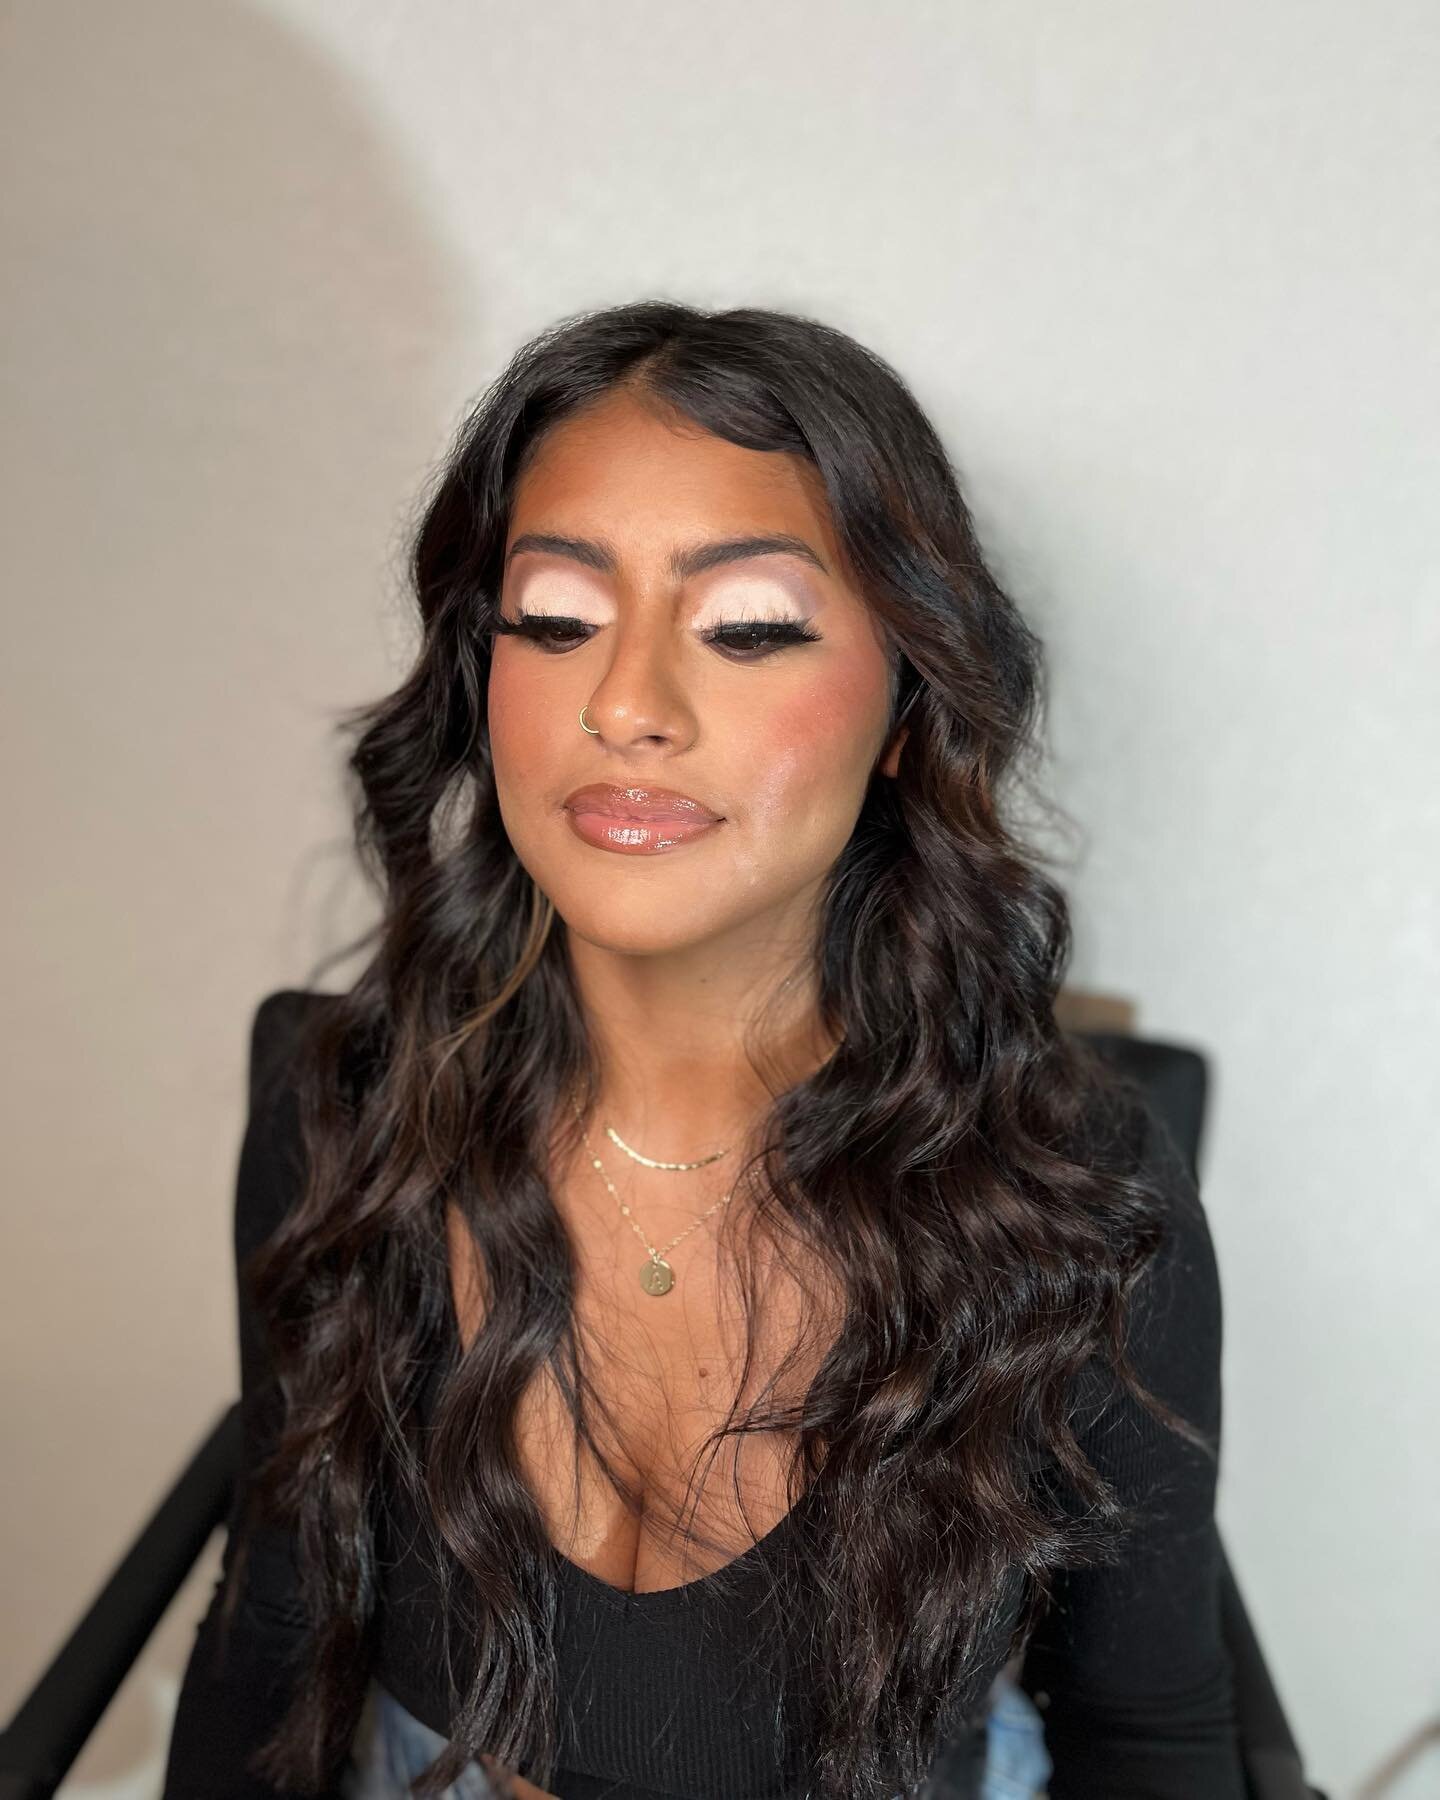 We love a Soft Summer Beat! Join us this Sunday, July 10th at 5pm to learn how to accomplish this look! Register on the website &amp; we might send you a gift 😉

https://www.jjamalbeauty.com/jjamalbeautyhappyhour

#jjamalbeauty #jjamalbeautyhappyhou